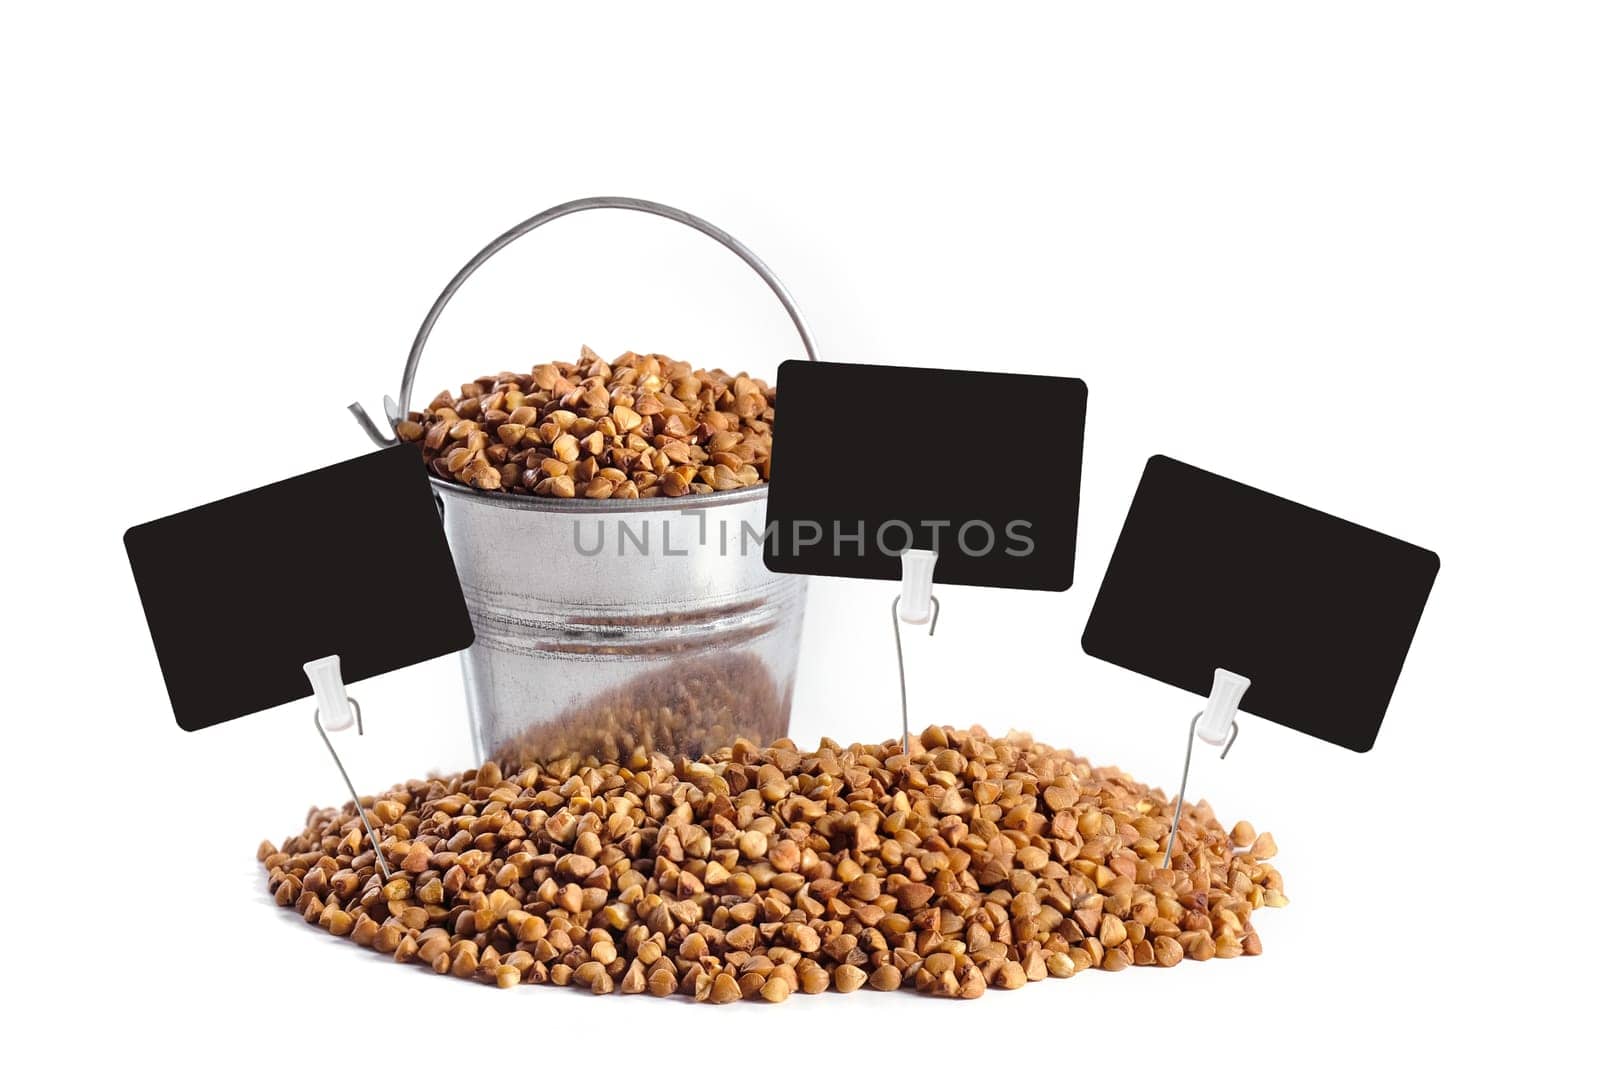 Metal bucket and buckwheat with empty price tags isolated on white background. Harvesting by Shablovskyistock